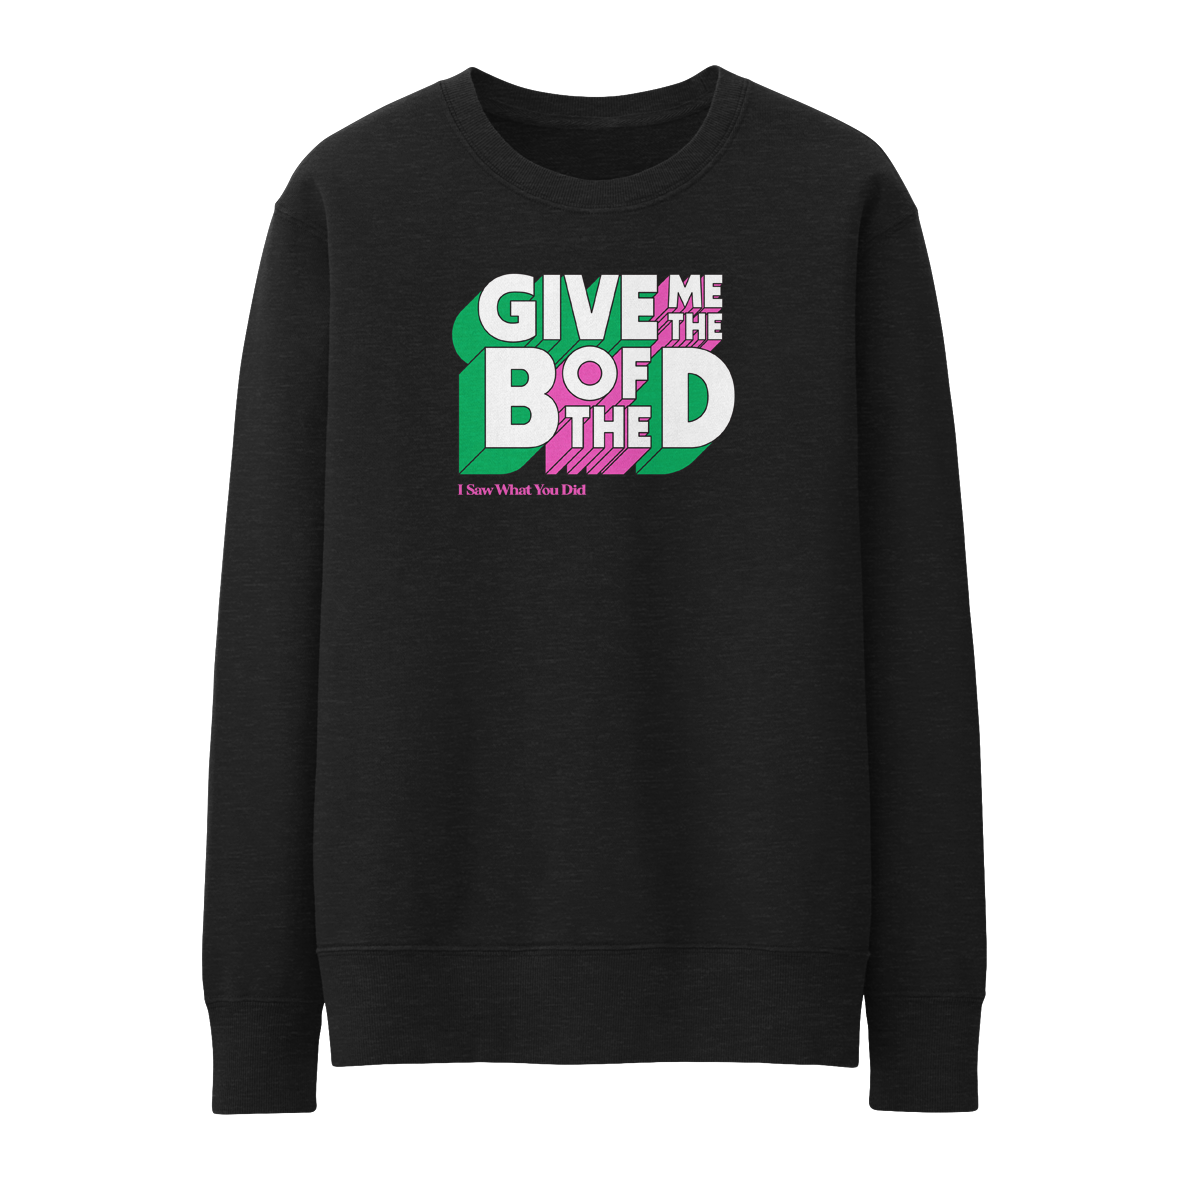 I Saw What You Did: Give Me The B Of The D Crewneck Sweatshirt